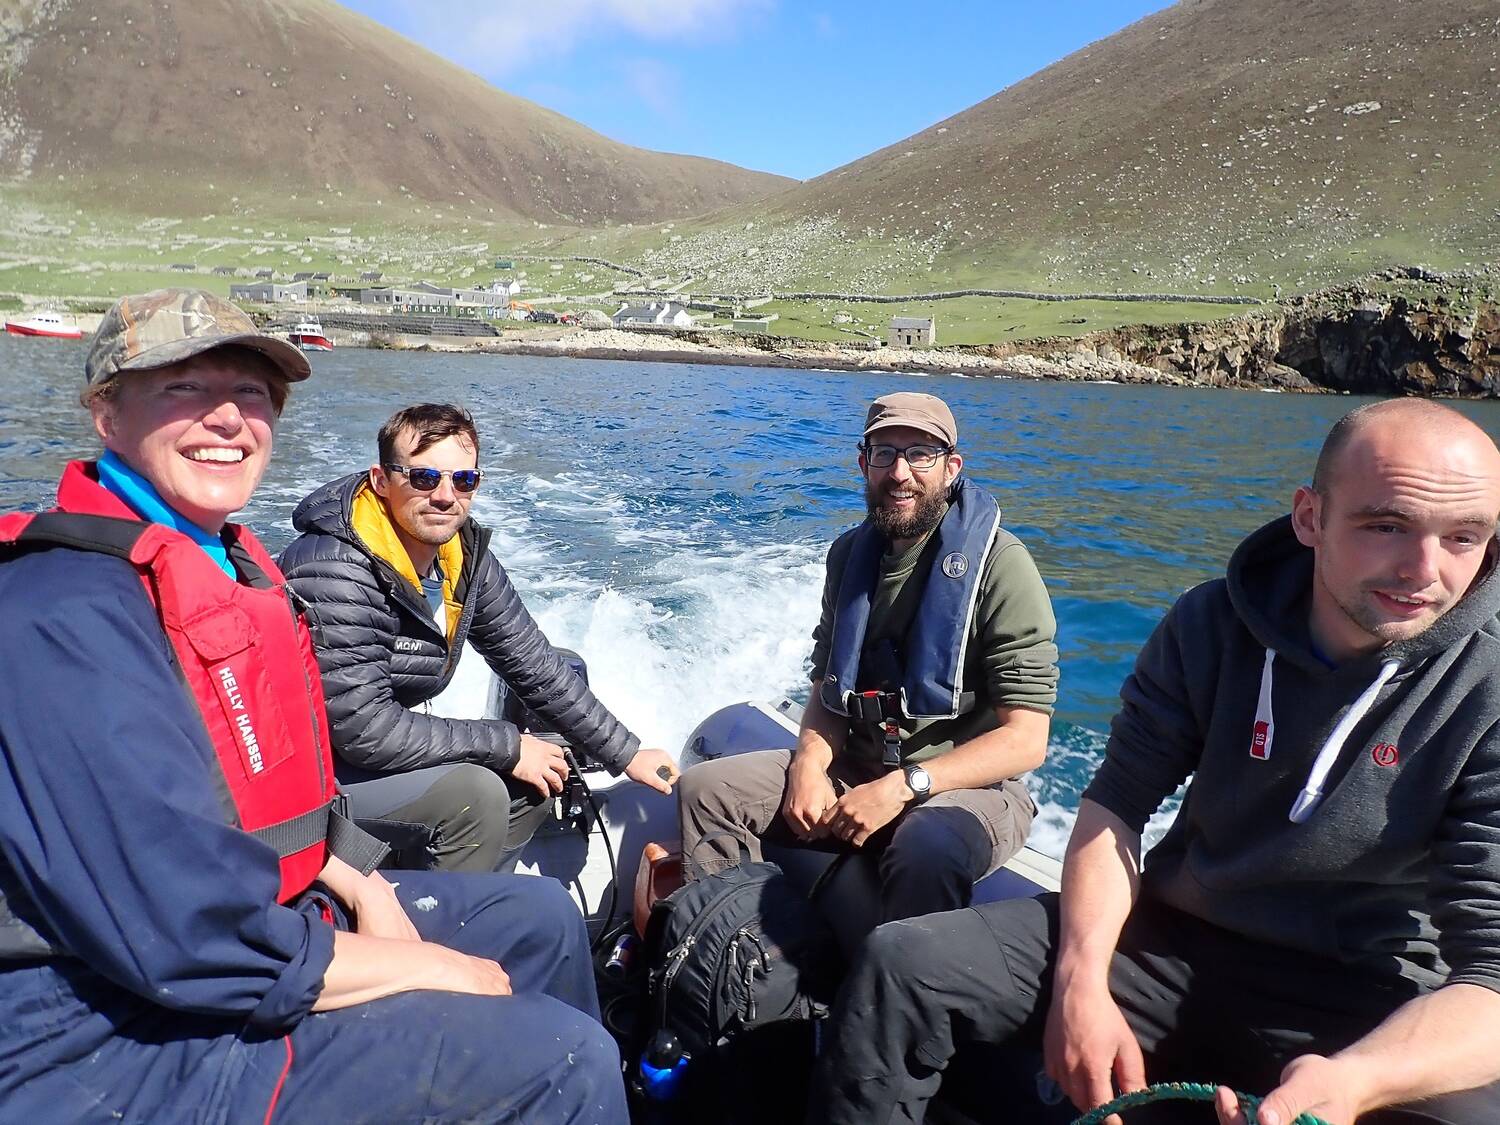 Four people sit in a RIB, heading across the sea away from an island beach. They wear life jackets and are smiling.